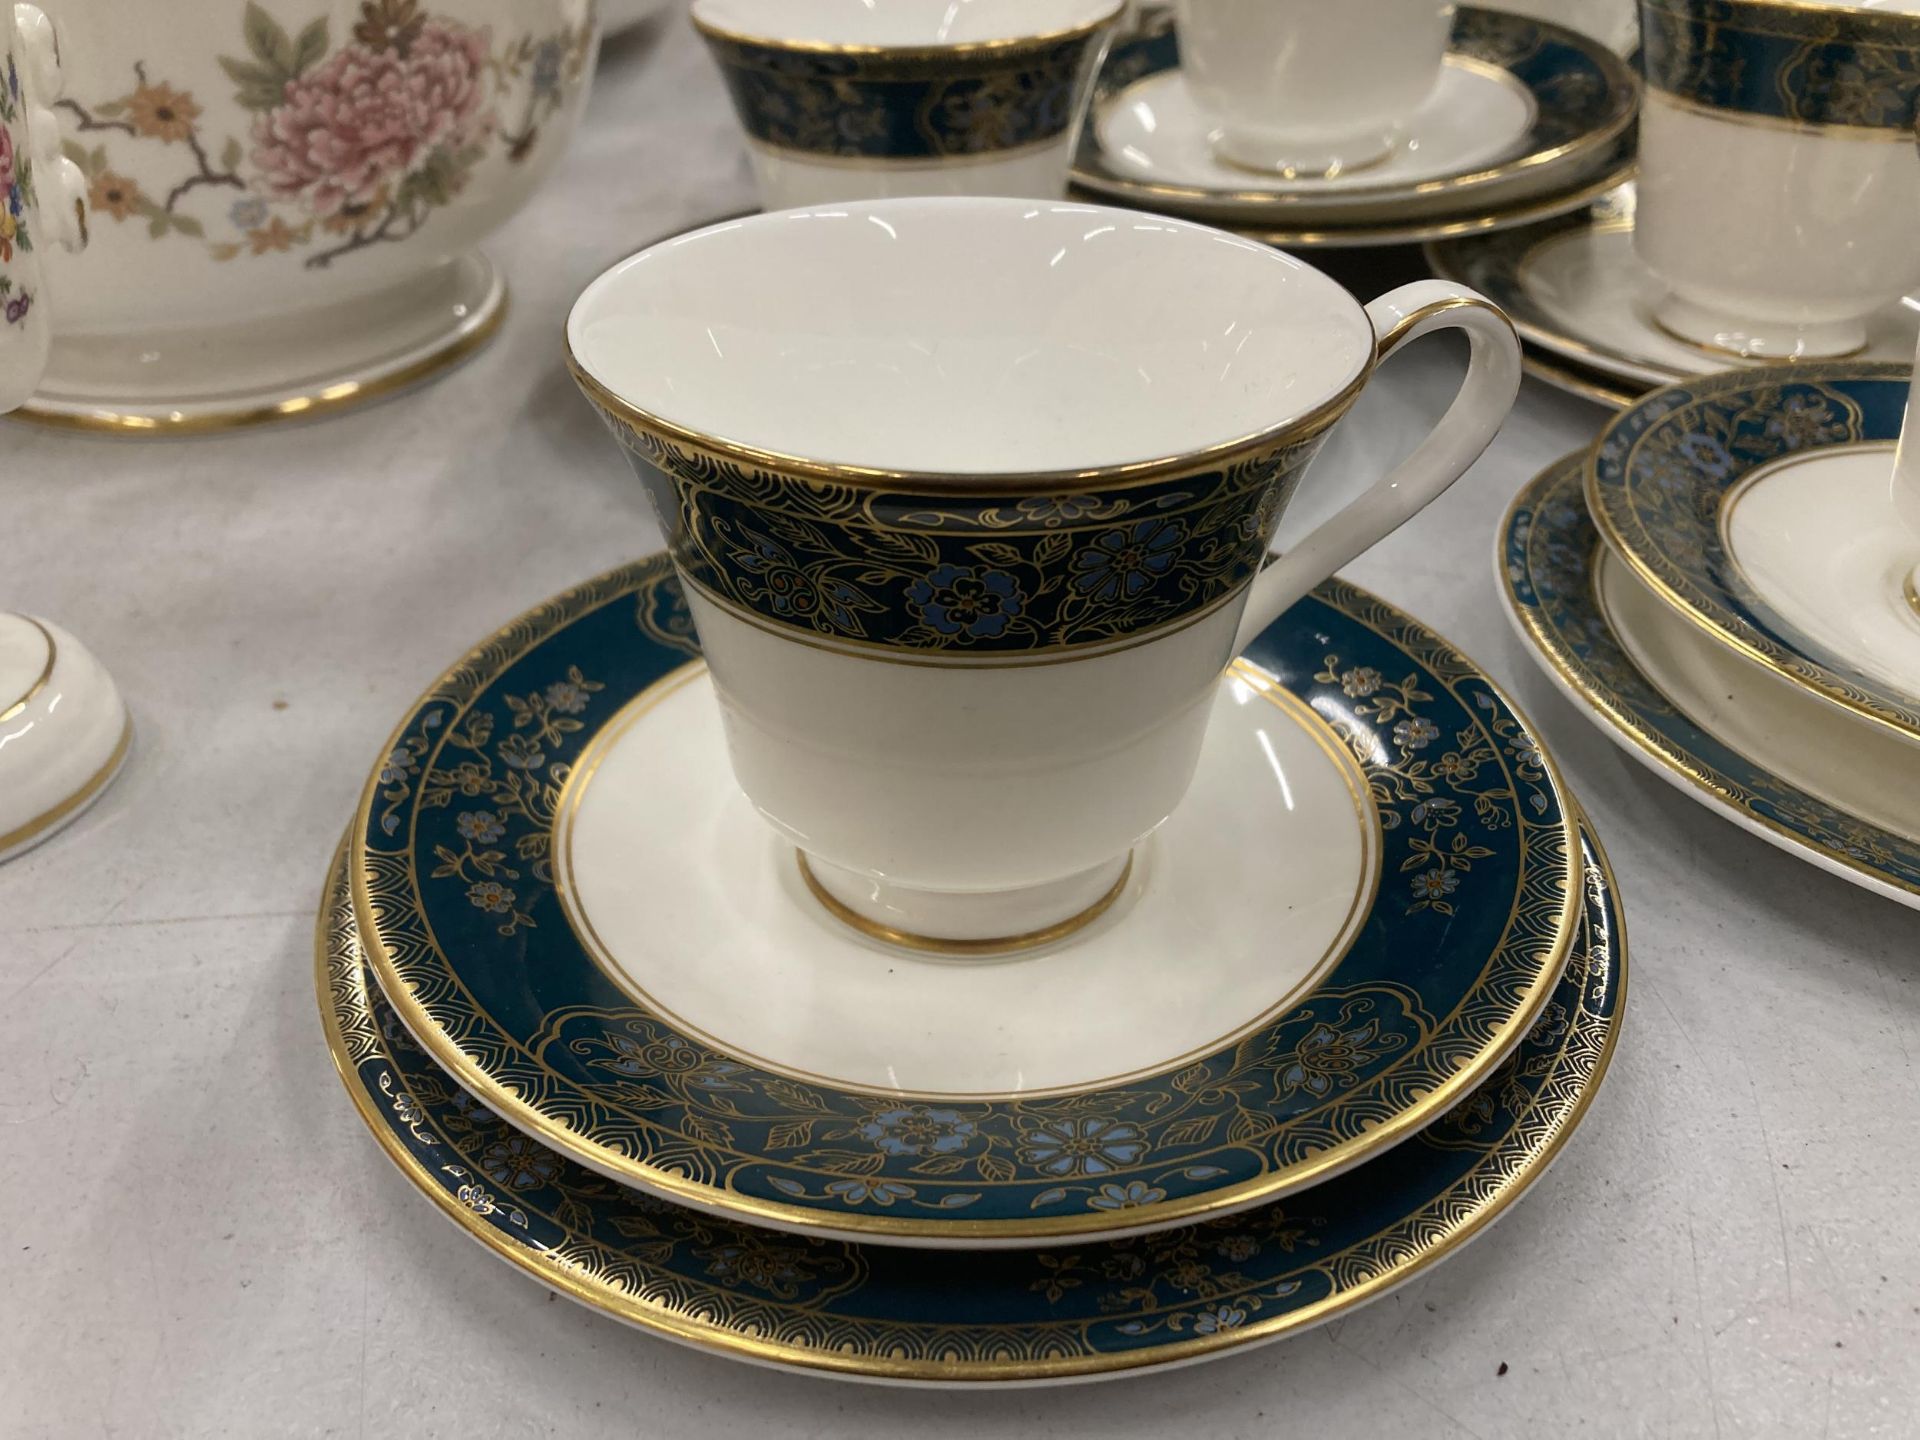 A LARGE ROYAL DOULTON 'CARLYLE' PATTERN TEA SERVICE - Image 5 of 7